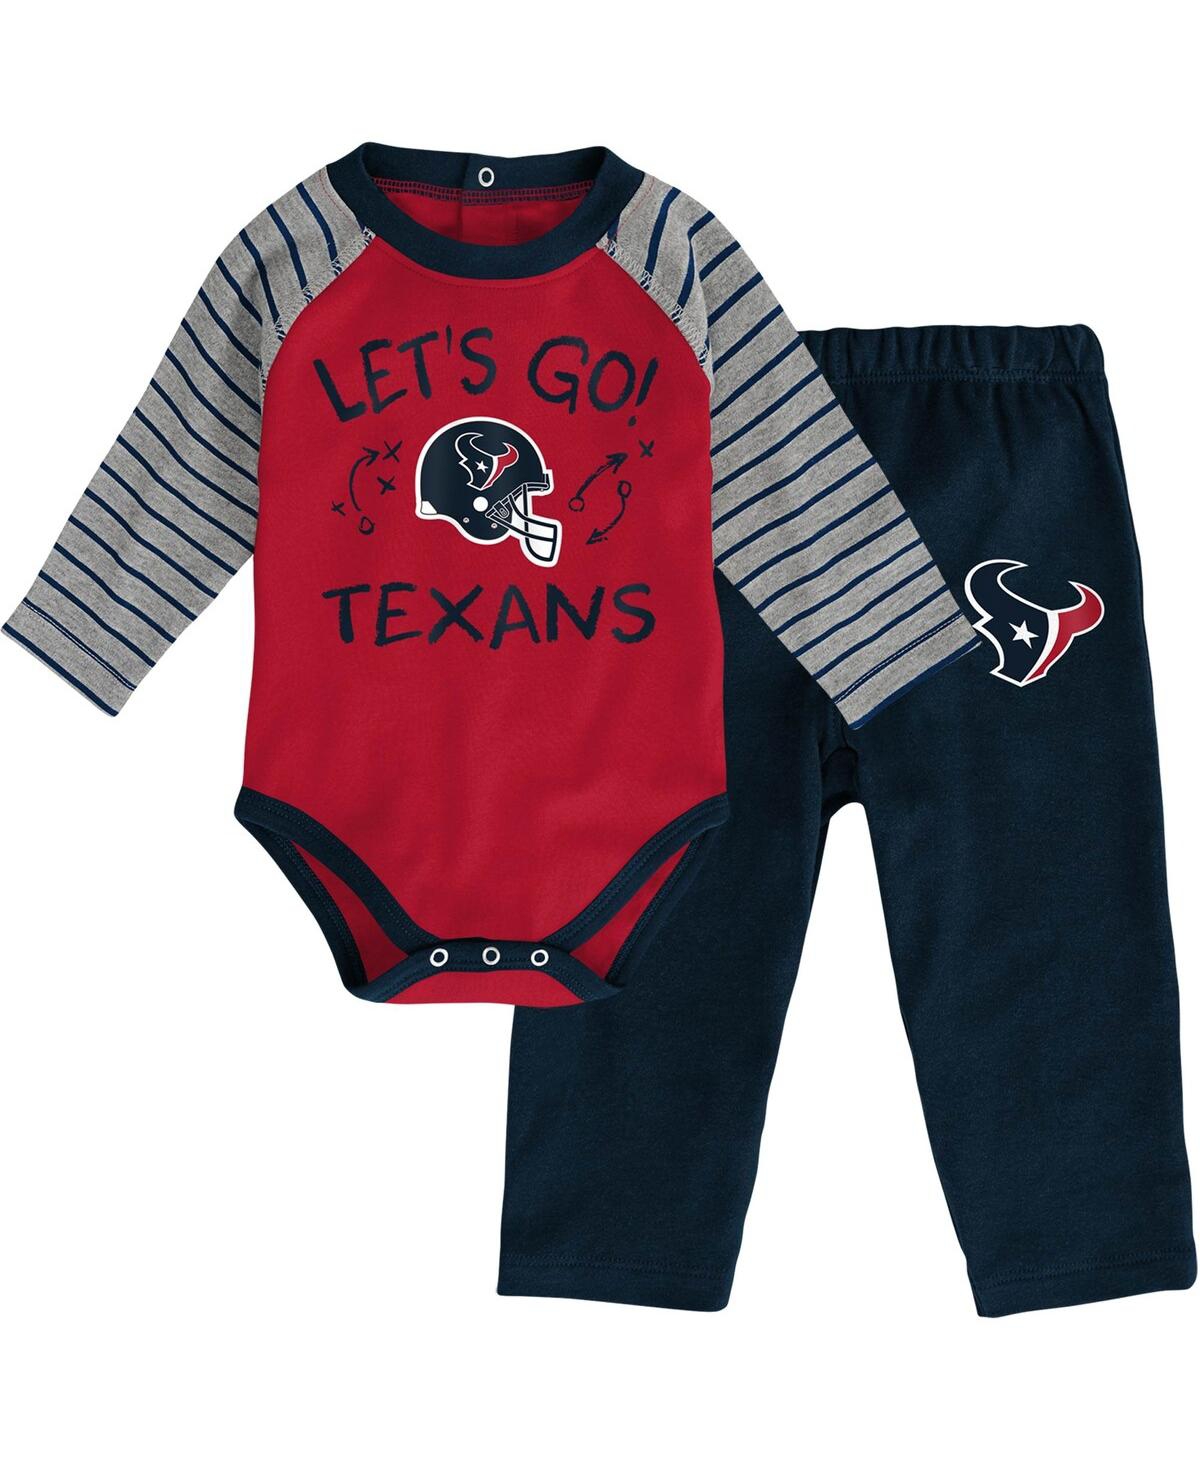 OUTERSTUFF INFANT BOYS AND GIRLS RED, NAVY HOUSTON TEXANS TOUCHDOWN RAGLAN LONG SLEEVE 2 PIECE BODYSUIT AND PAN